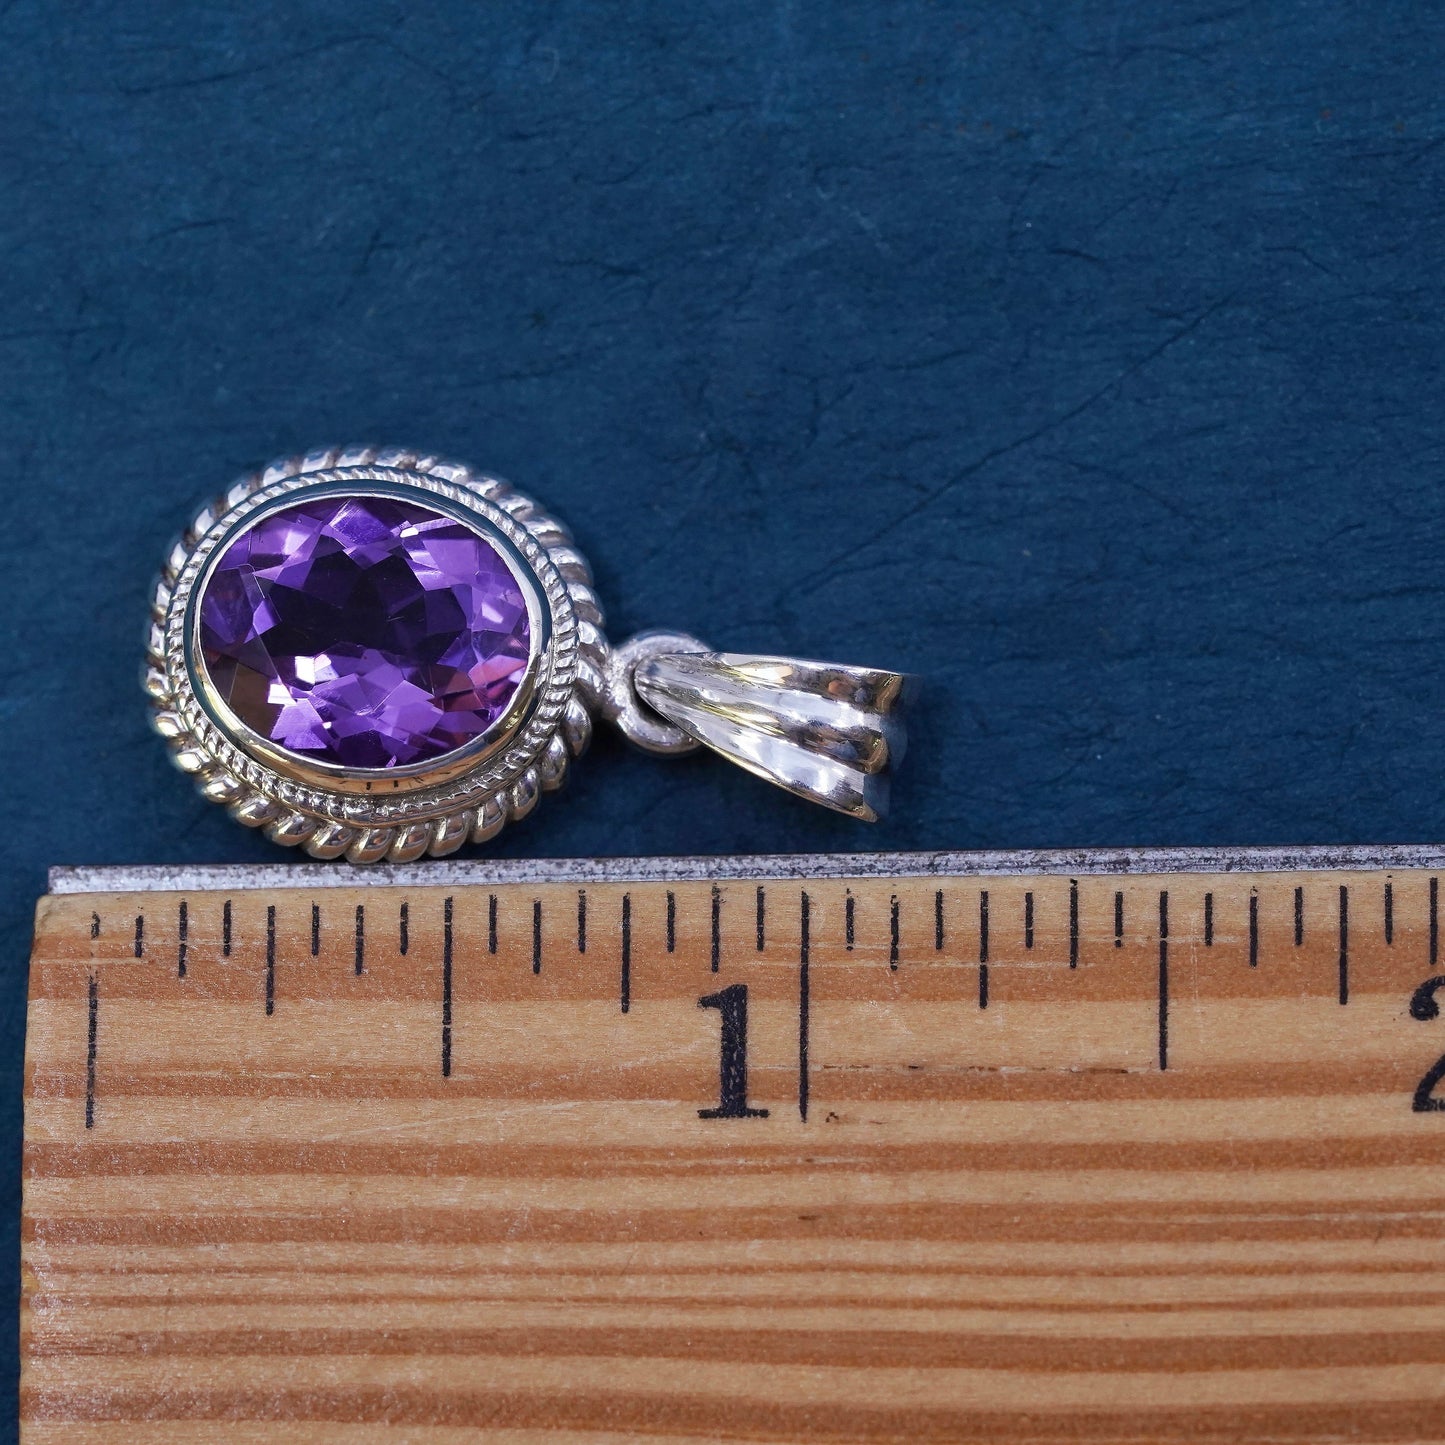 Vintage sterling 925 silver handmade pendant with amethyst and cz